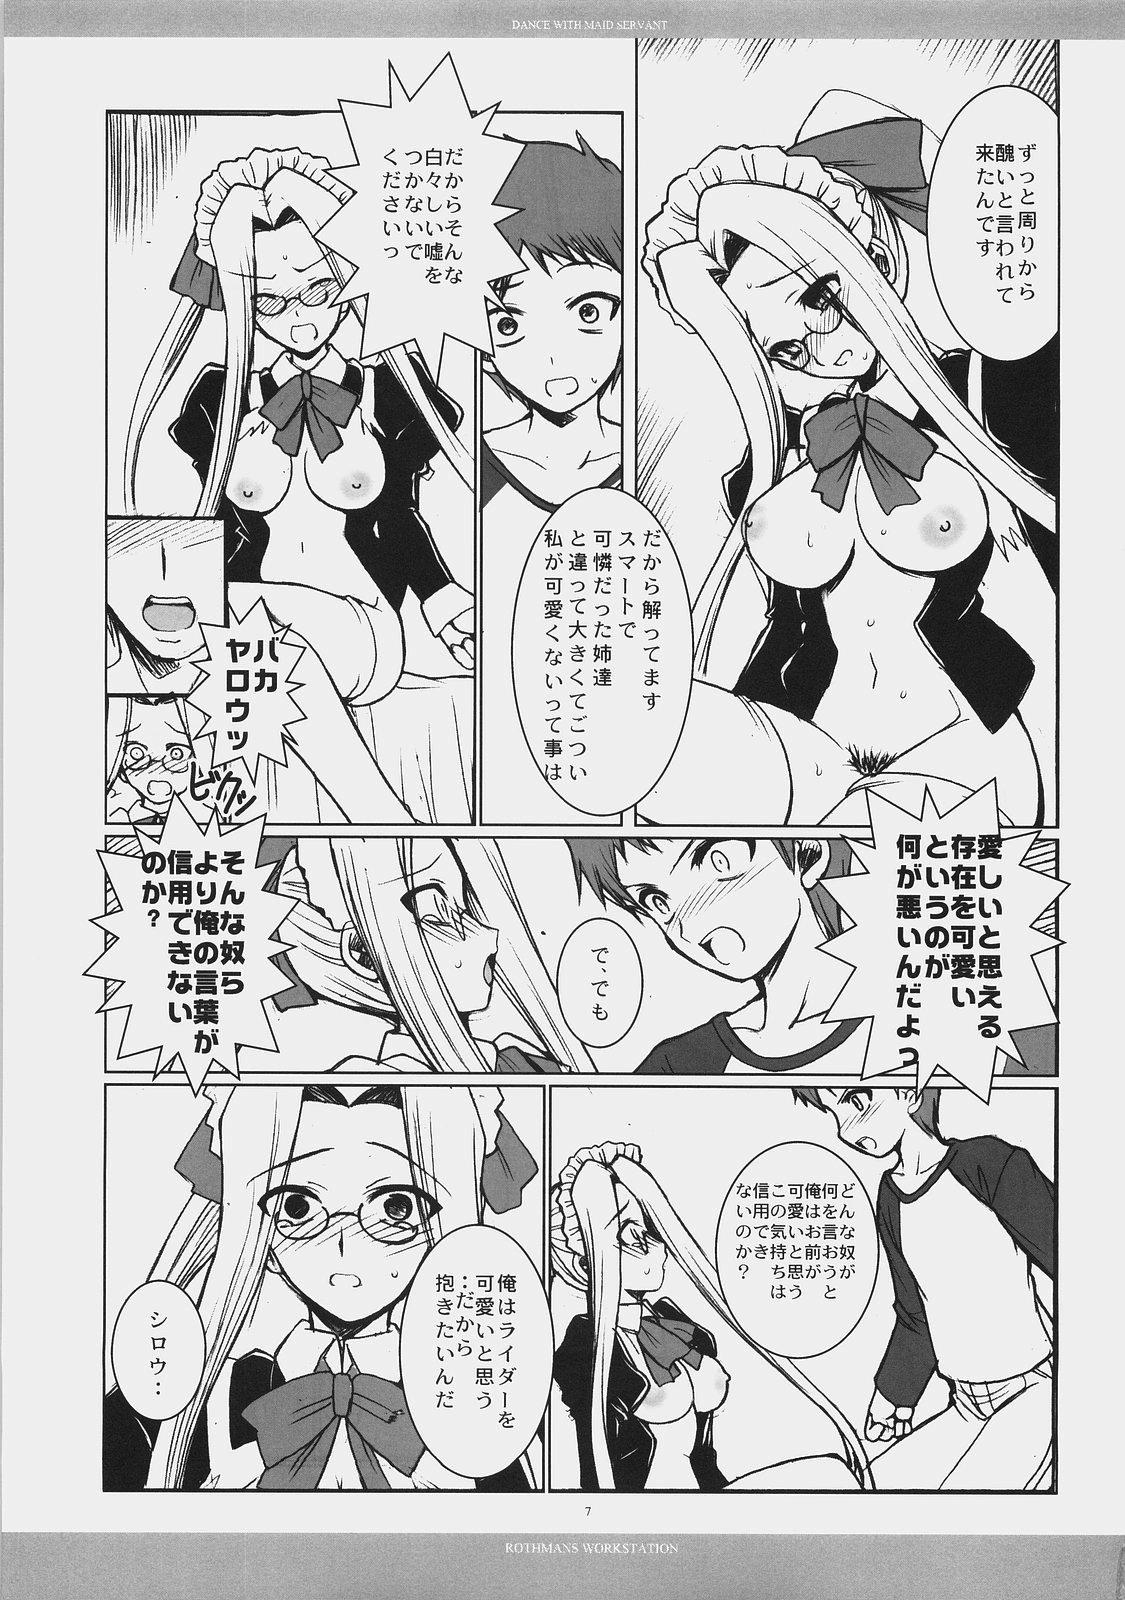 Free Dance with Maid Servant - Fate hollow ataraxia Crossdresser - Page 6